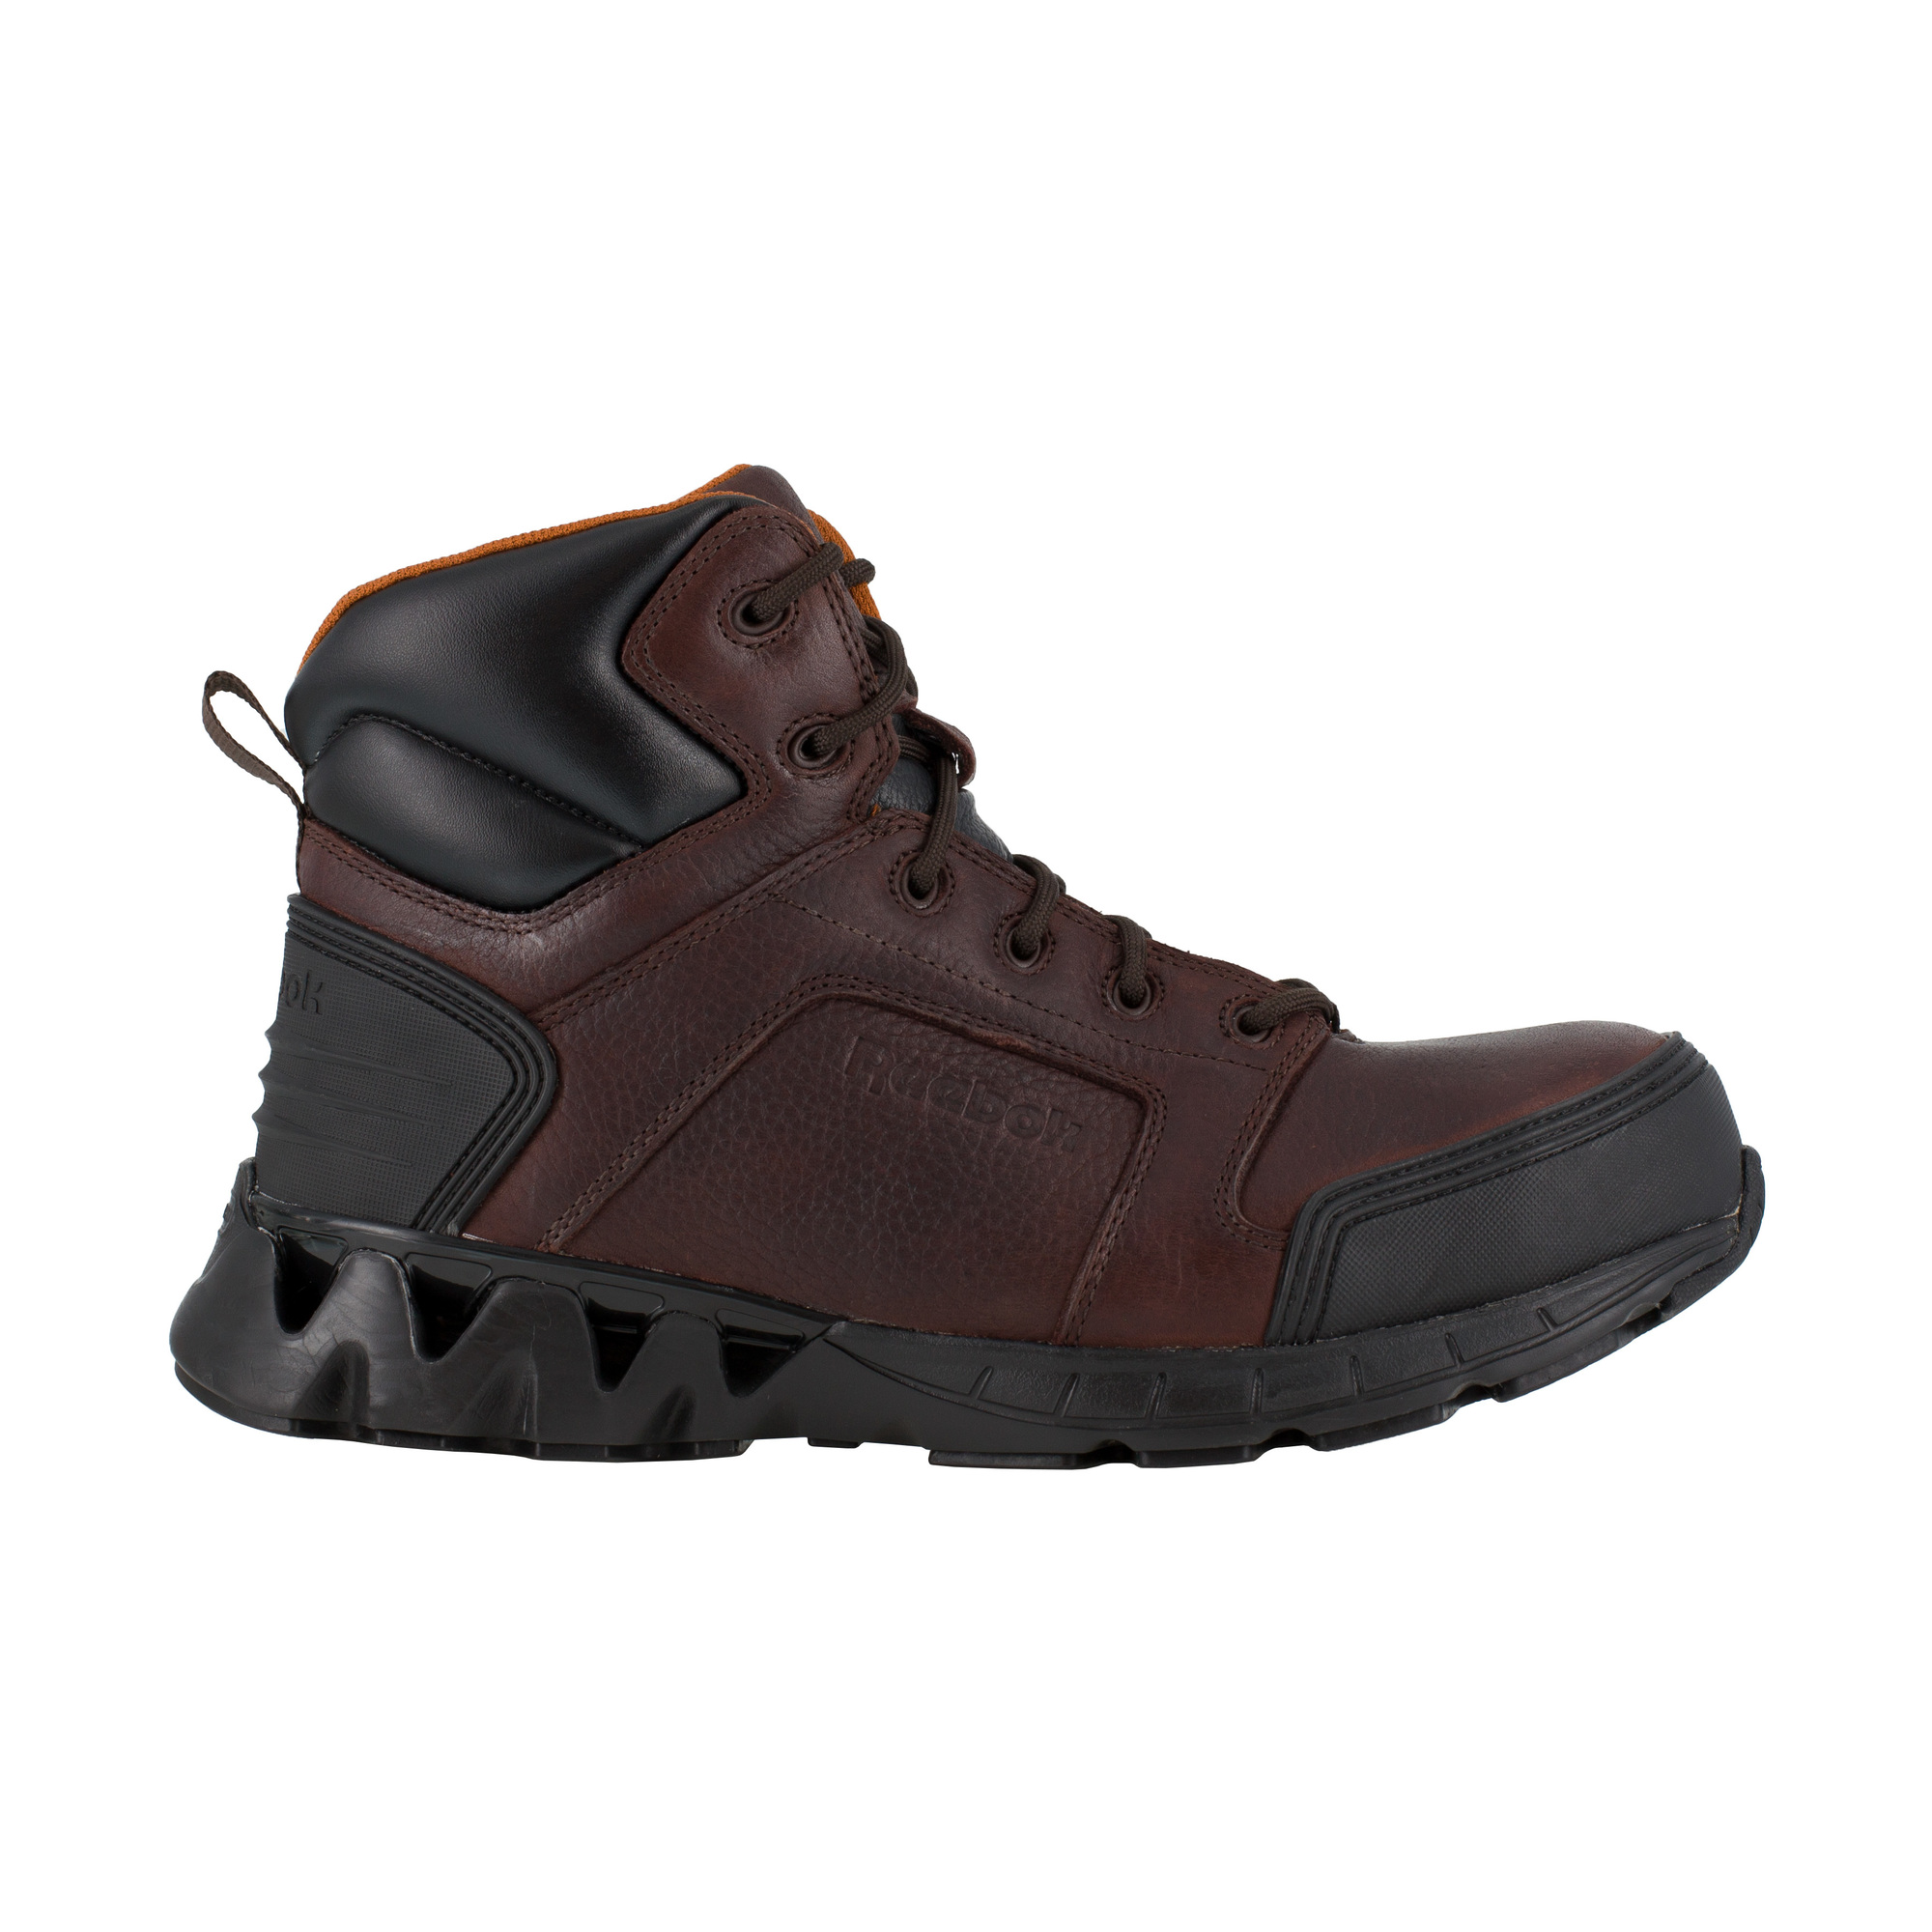 Reebok, 6Inch Athletic Work Boot, Size 7 1/2, Width Wide, Color Dark Brown, Model RB7005 -  RB7005-W-07.5